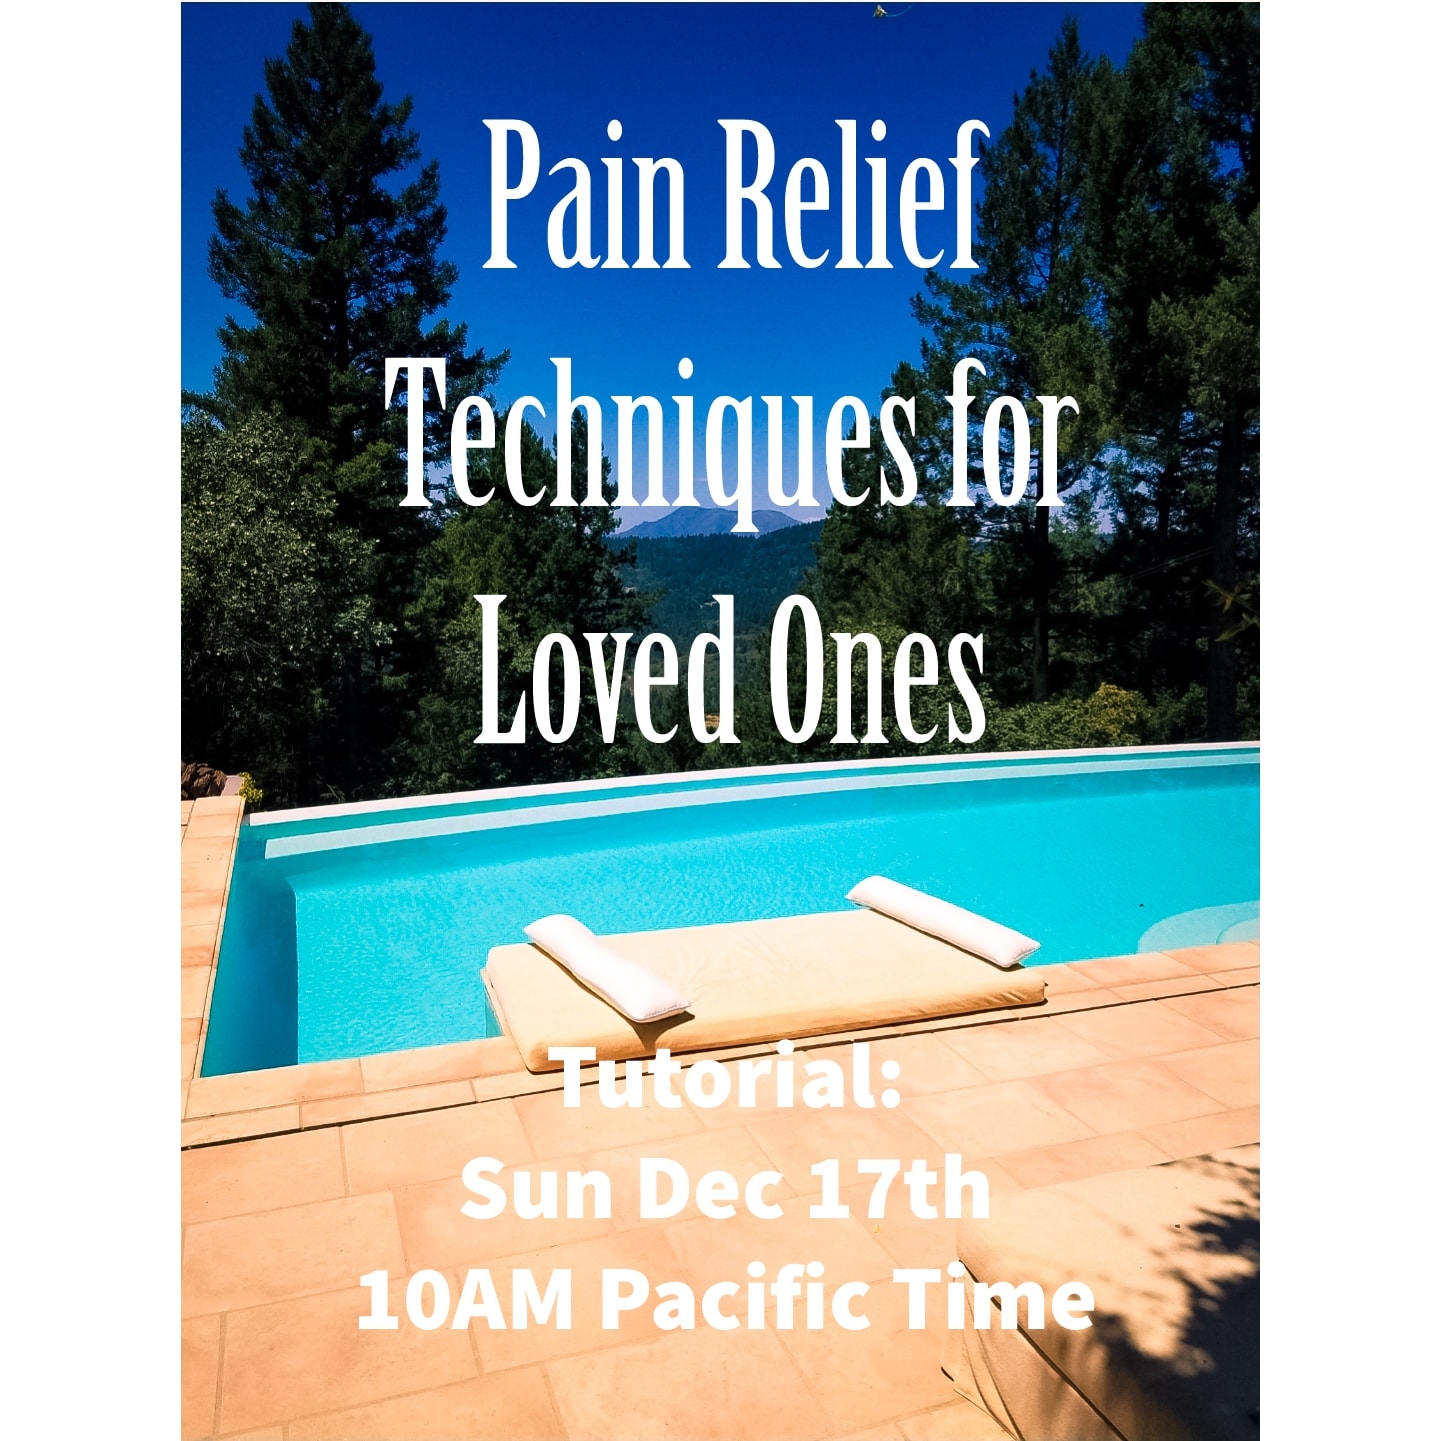 Pain Relief Techniques for Loved Ones